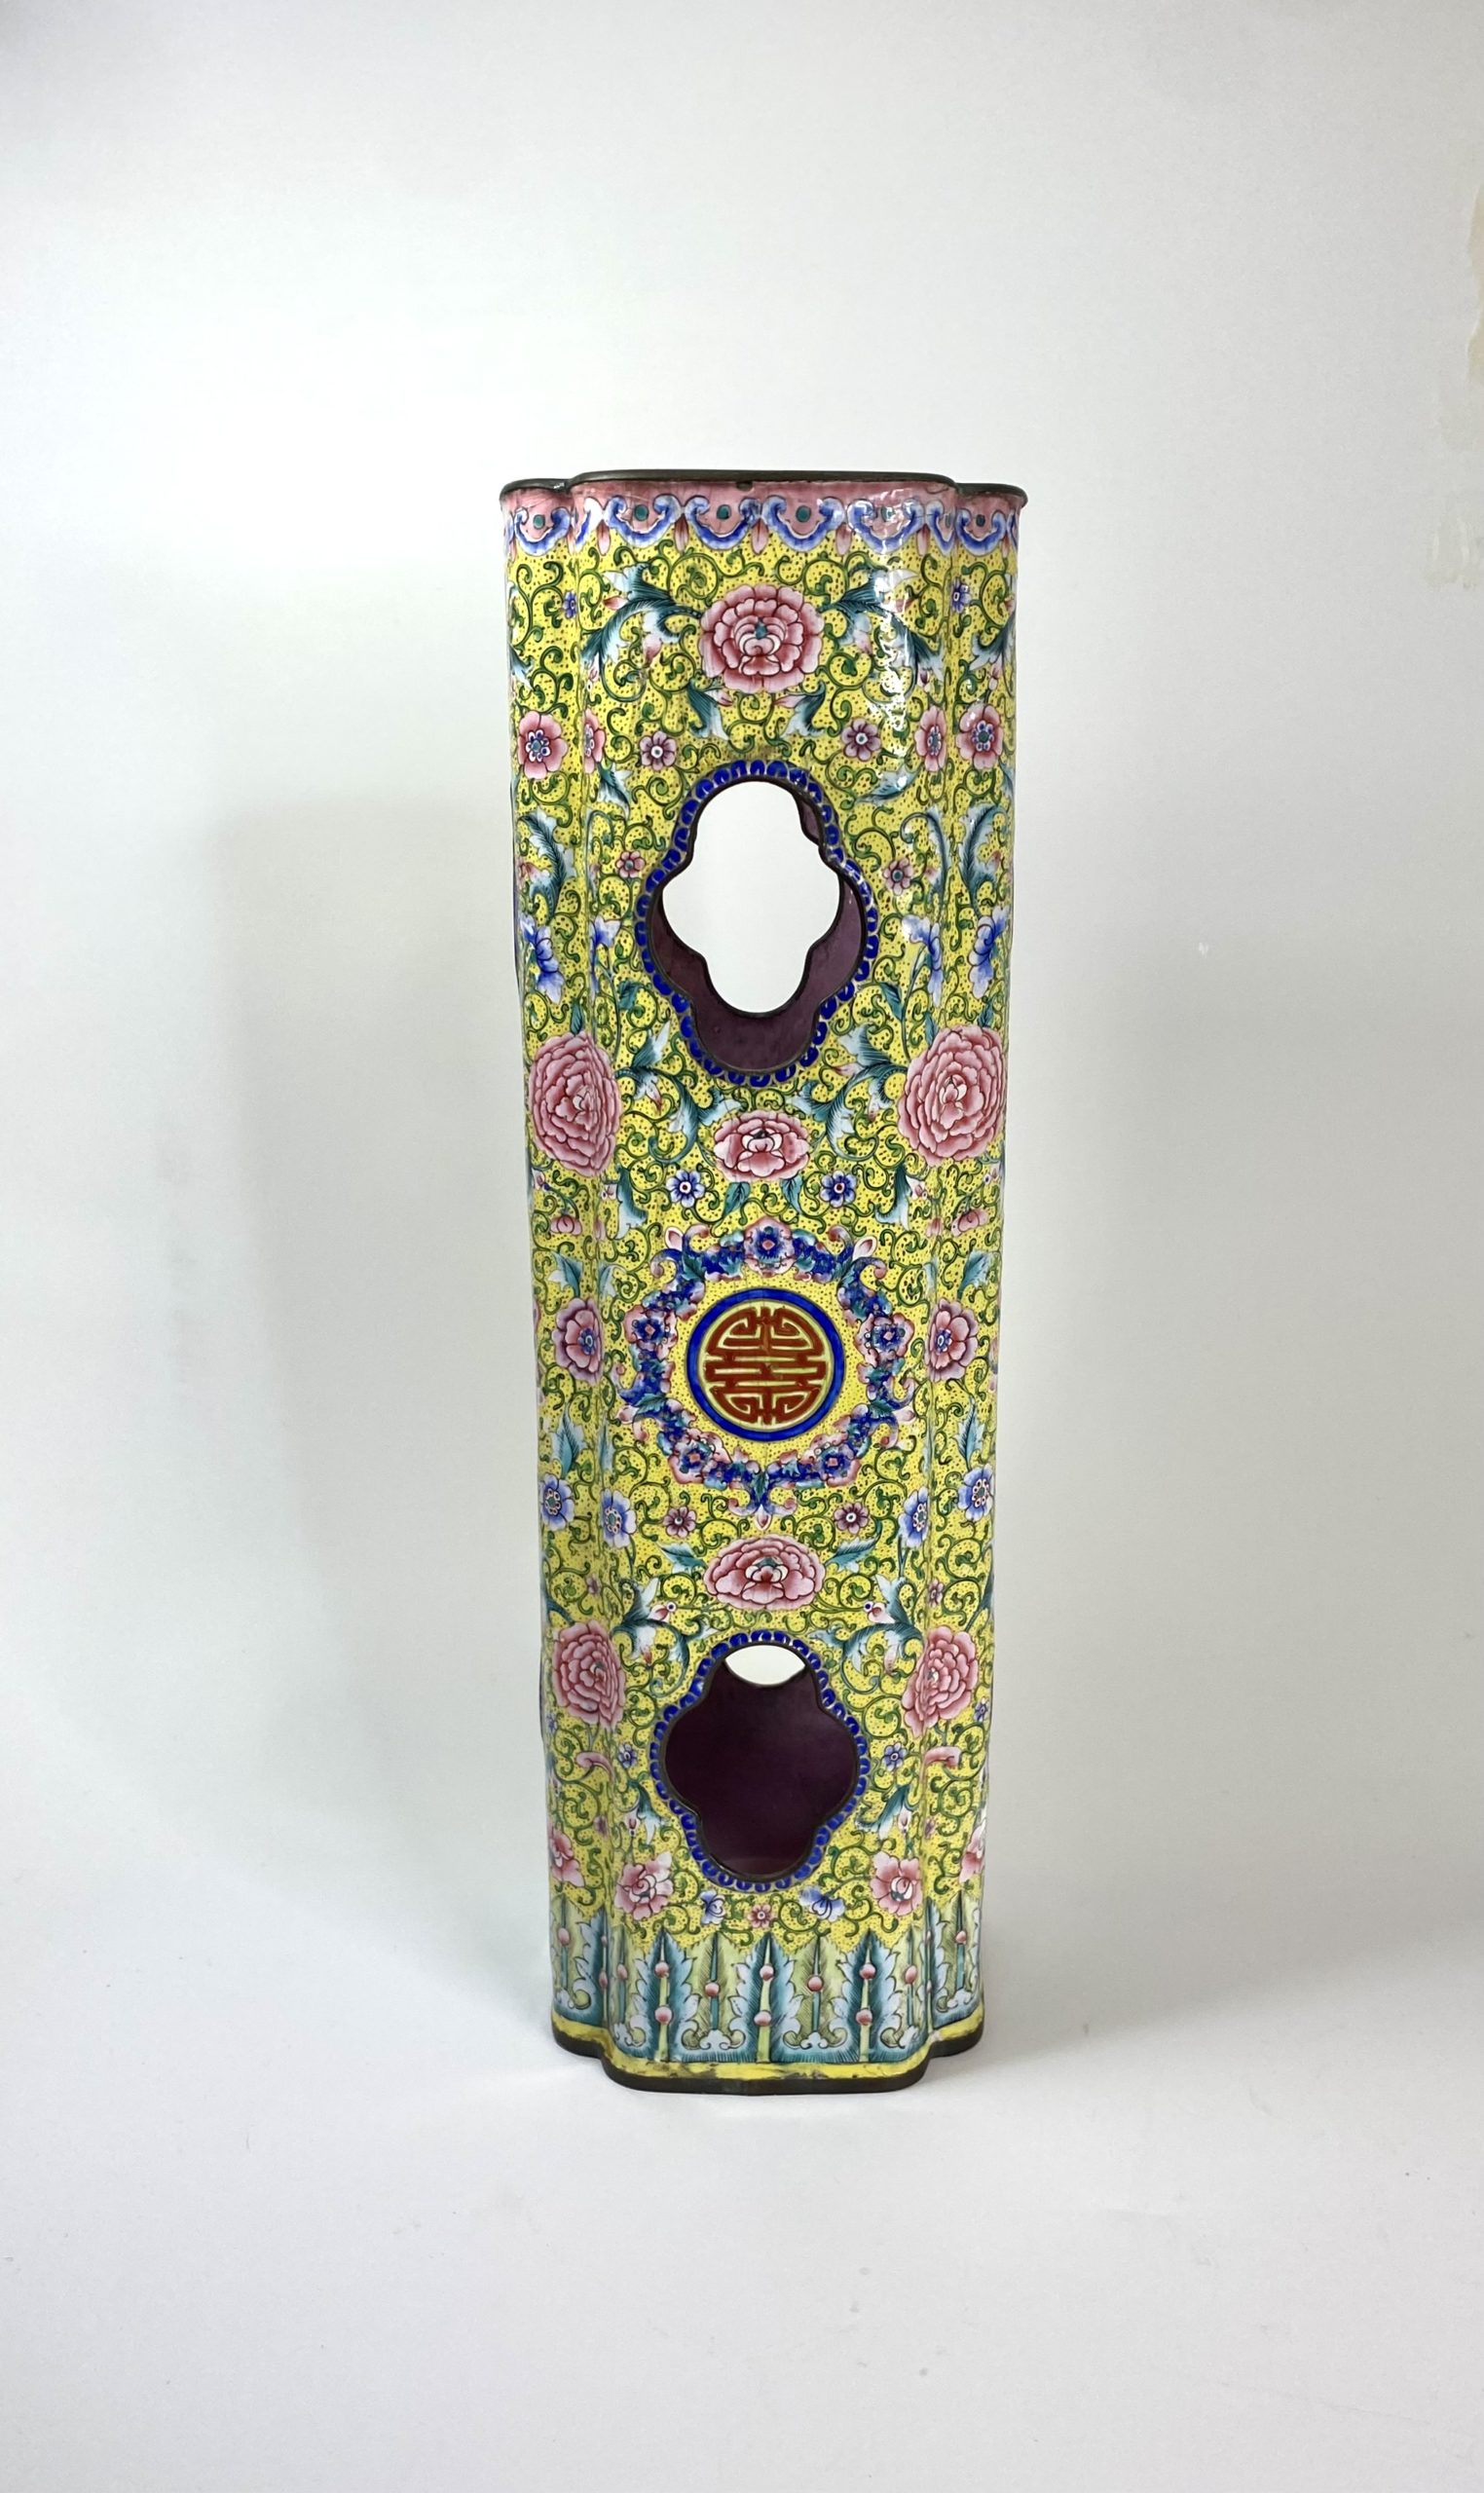 Chinese Canton enamel hat stand, c. 1800. Qing Dynasty